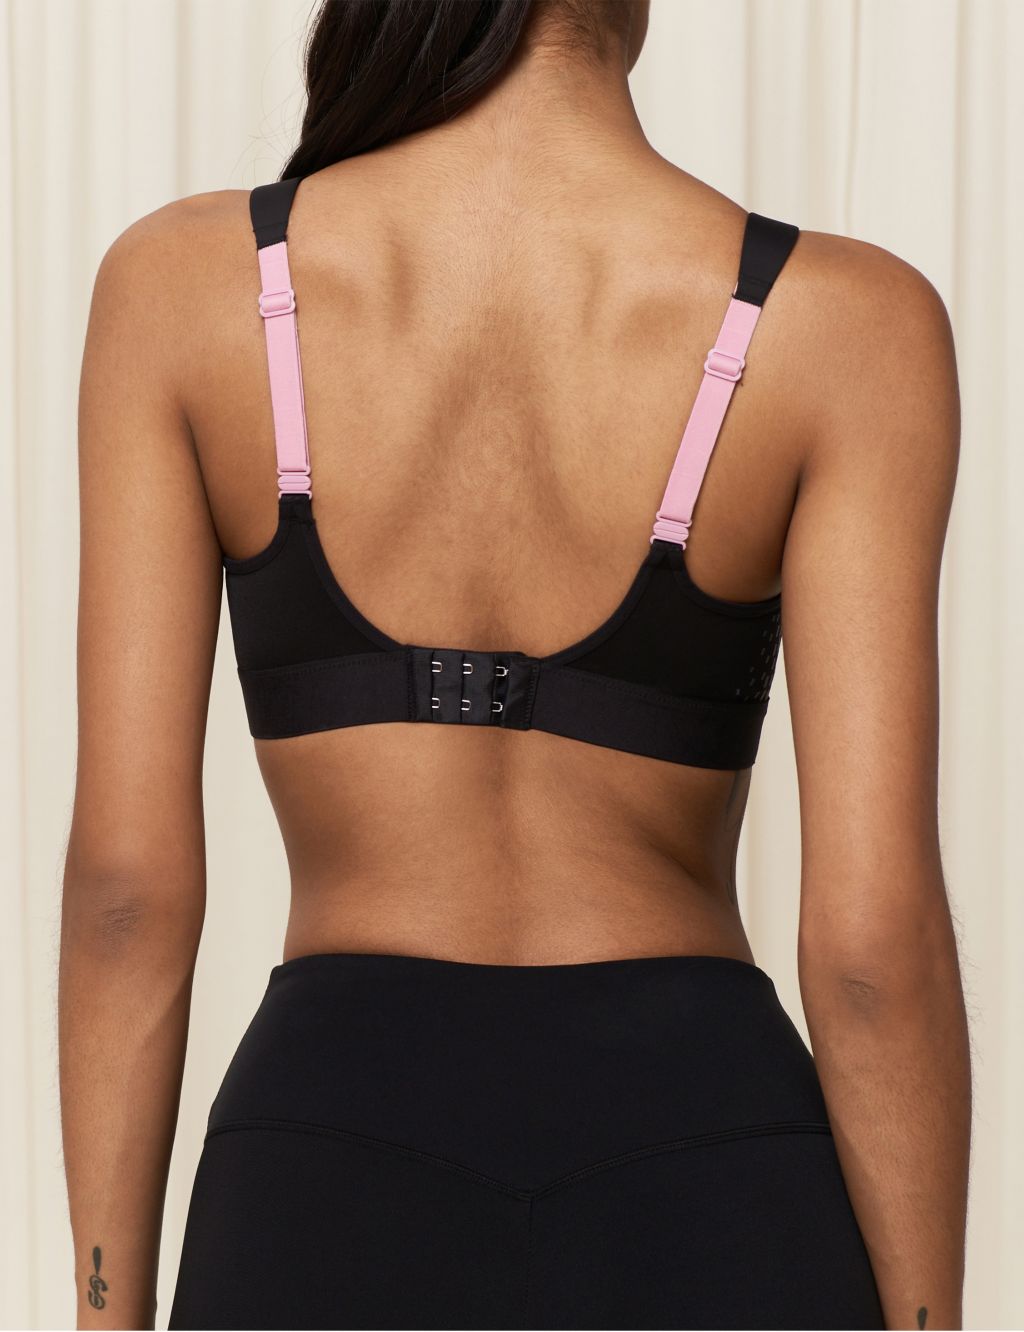 Triaction Extreme Lite Wired Sports Bra image 4